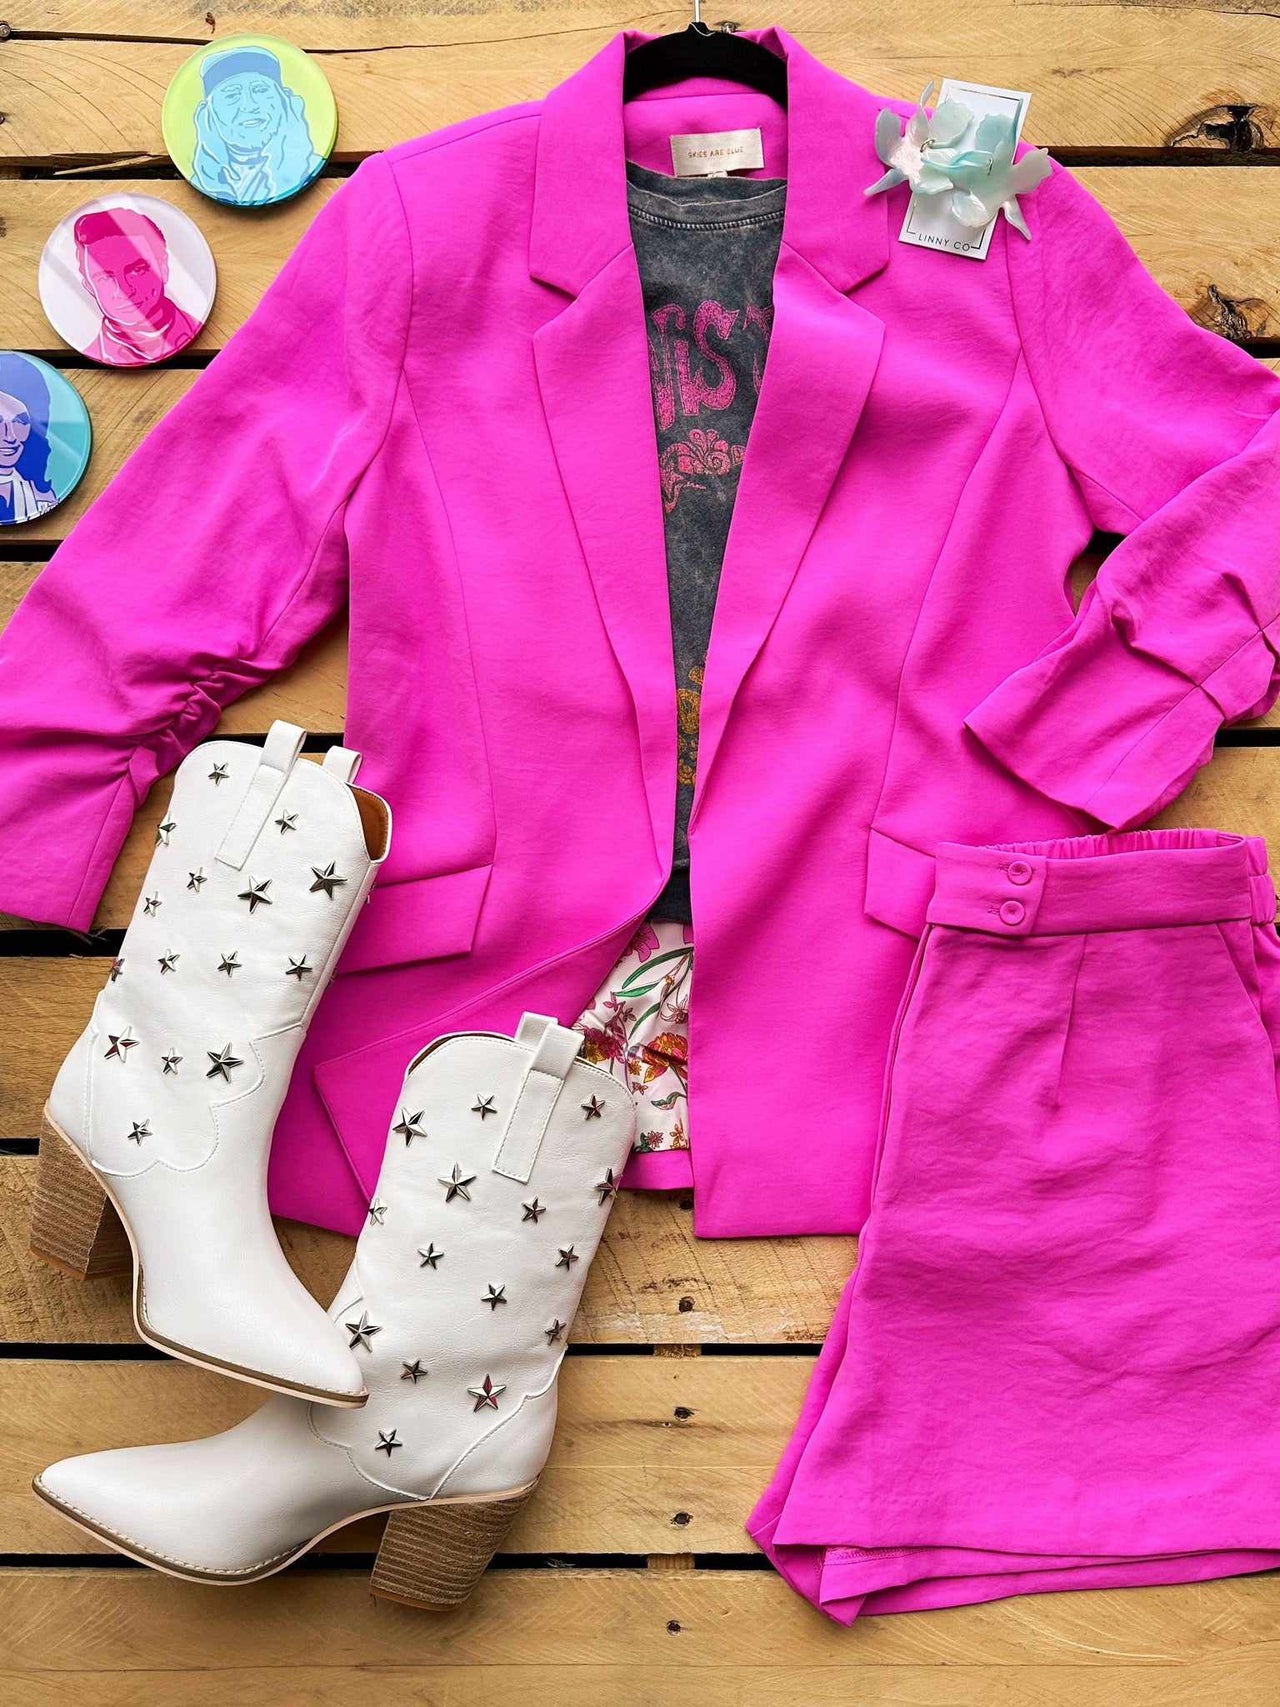 Pink blazer and shorts summer wear to work outfit.